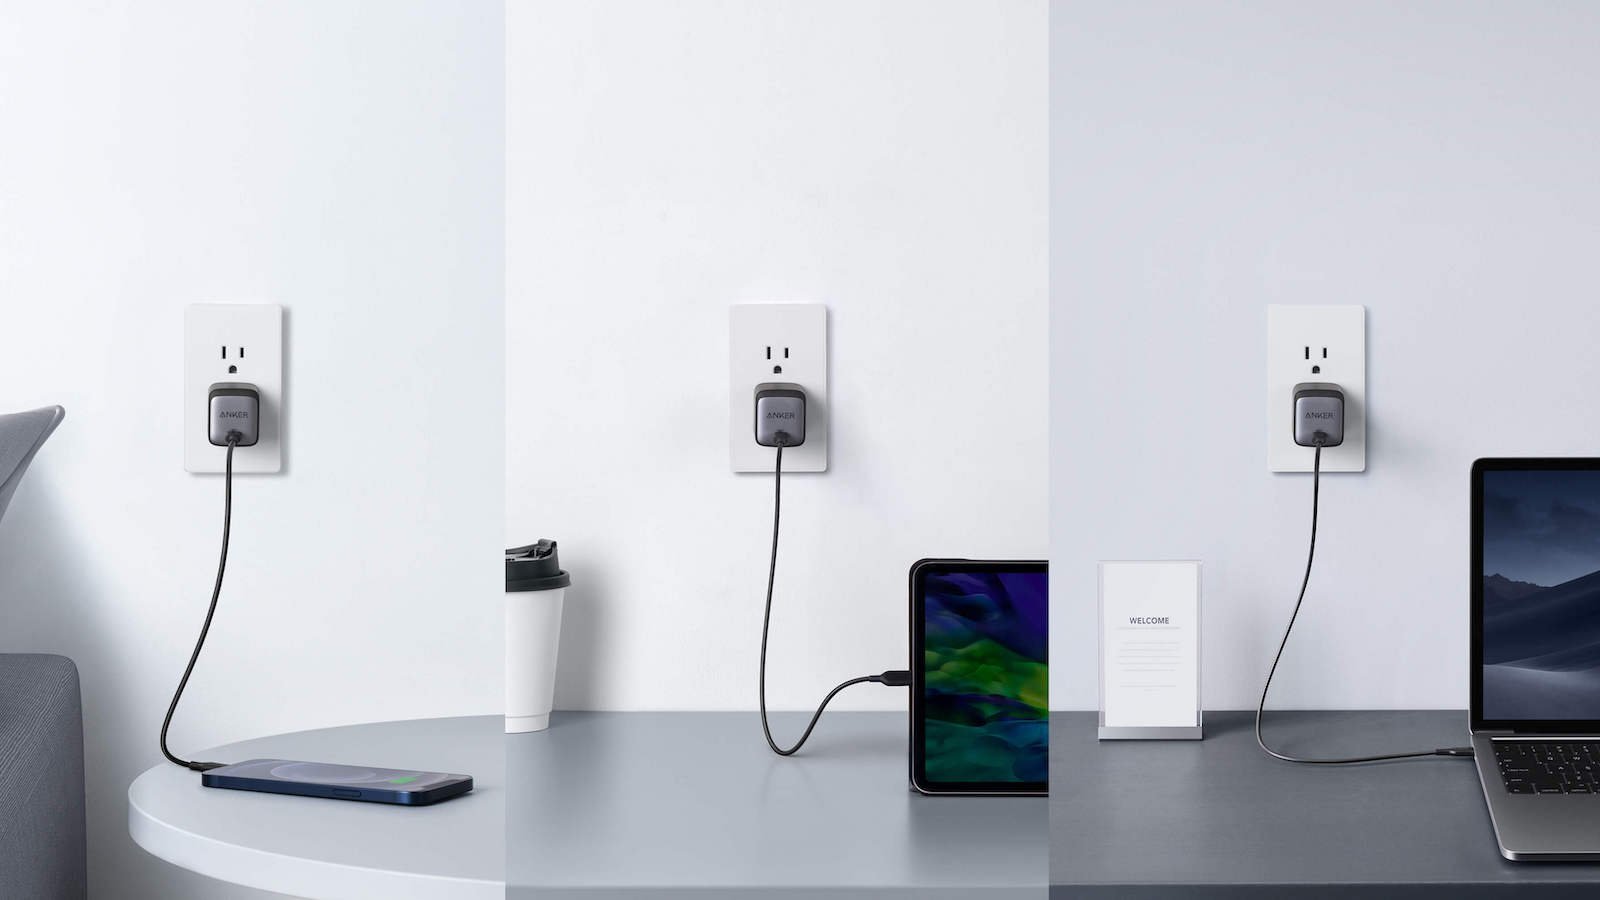 Anker Nano II 30W charger is powered by GaN II for fast charging with a tiny footprint